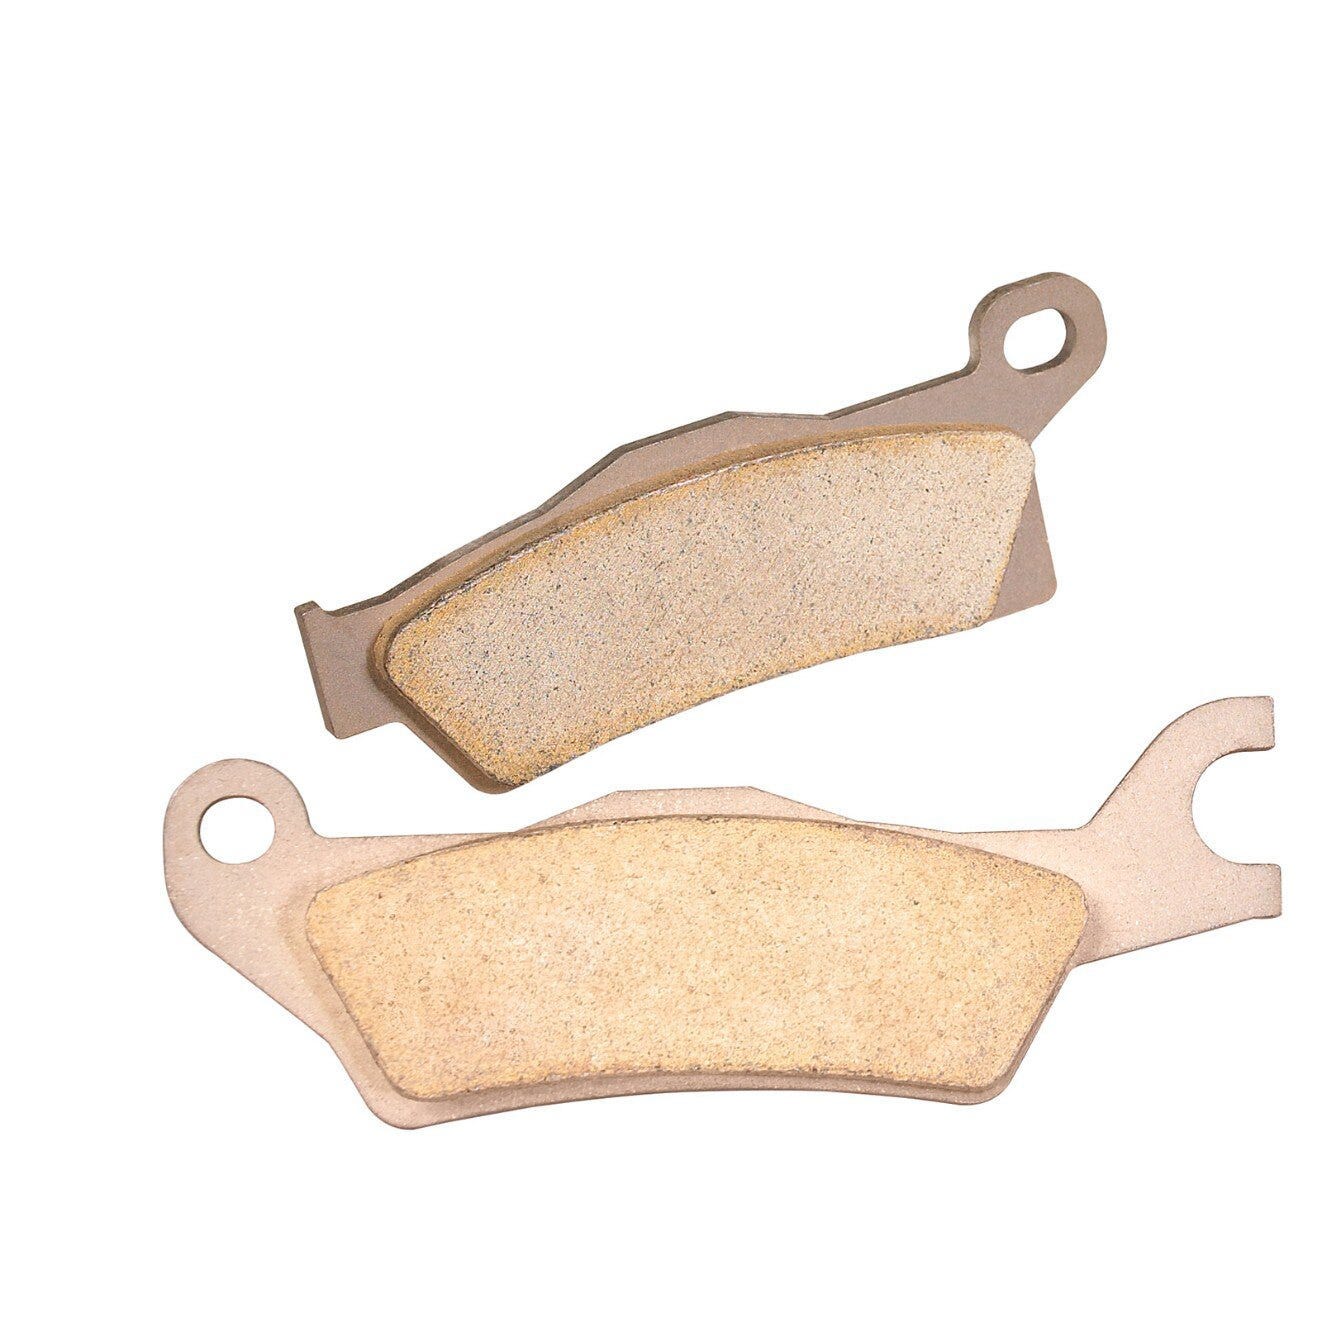 Can-am Metallic Brake Pad Kit - Front Left 715900249 - The Parts Lodge